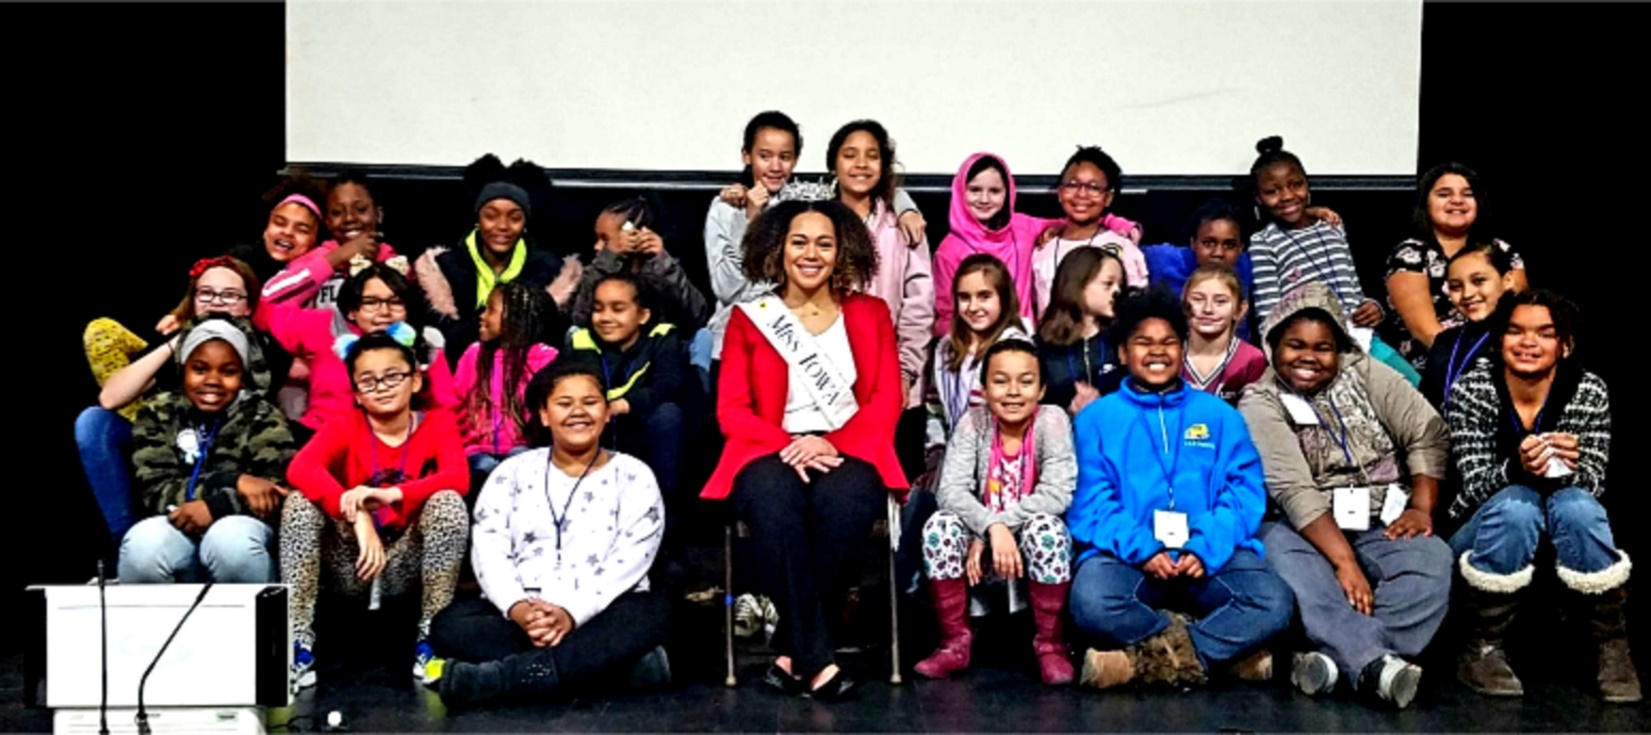 Miss Iowa 2018 posing with students at Madison Elementary School in Davenport, Iowa